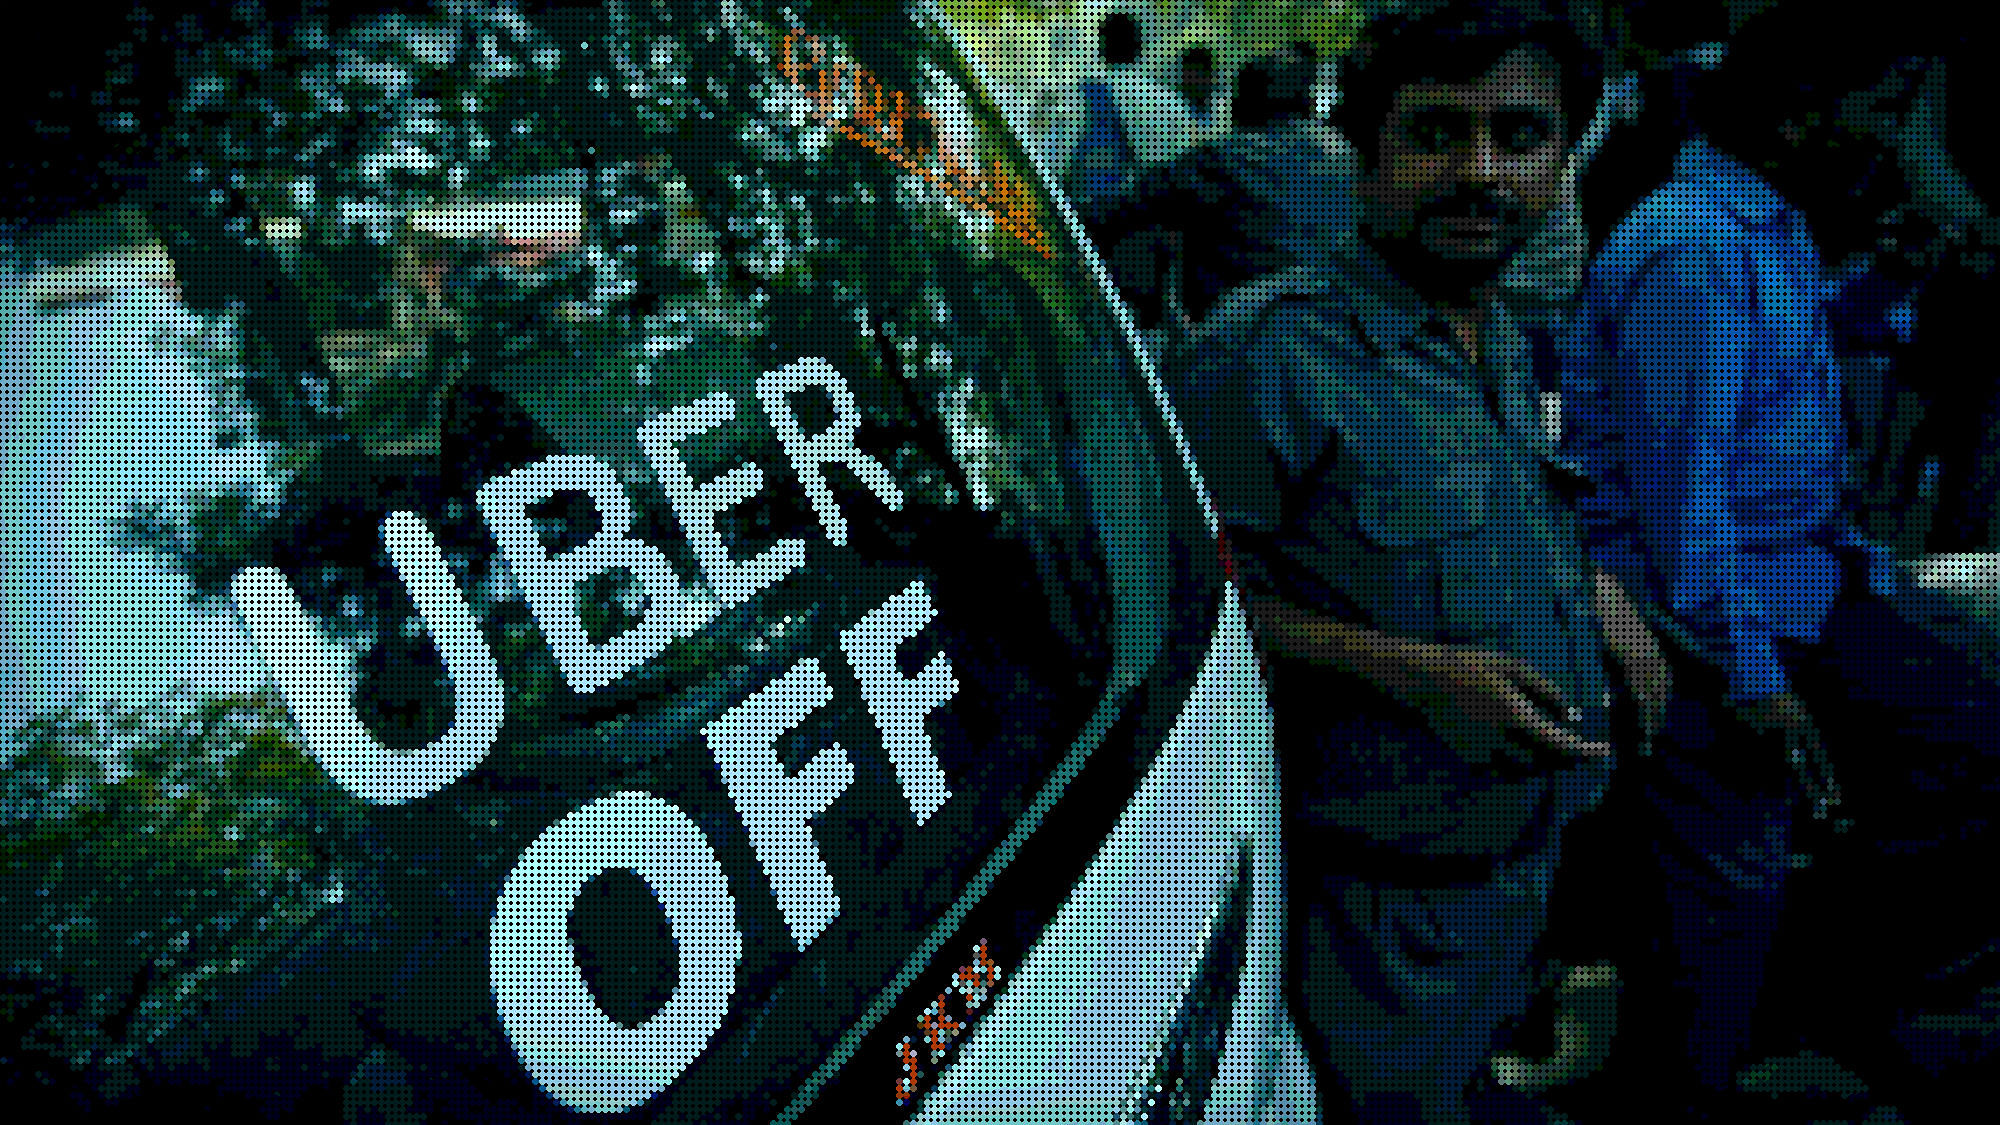 However, Ola and Uber maintained that there is no disruption to the service in Delhi-NCR.